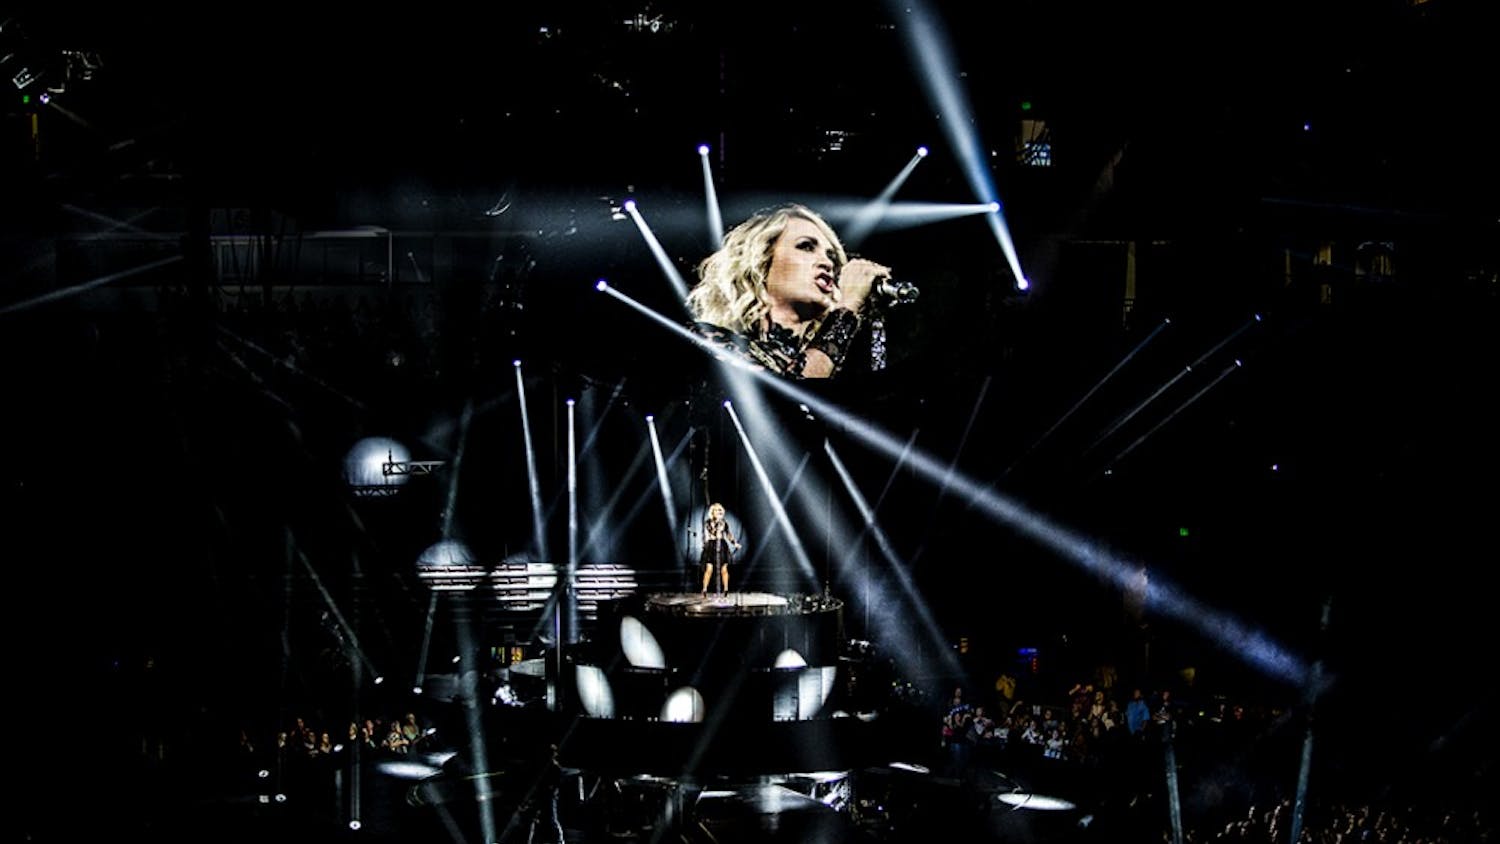 Carrie Underwood performed old classics as well as newer material to a large crowd at the Colonial Life Arena.